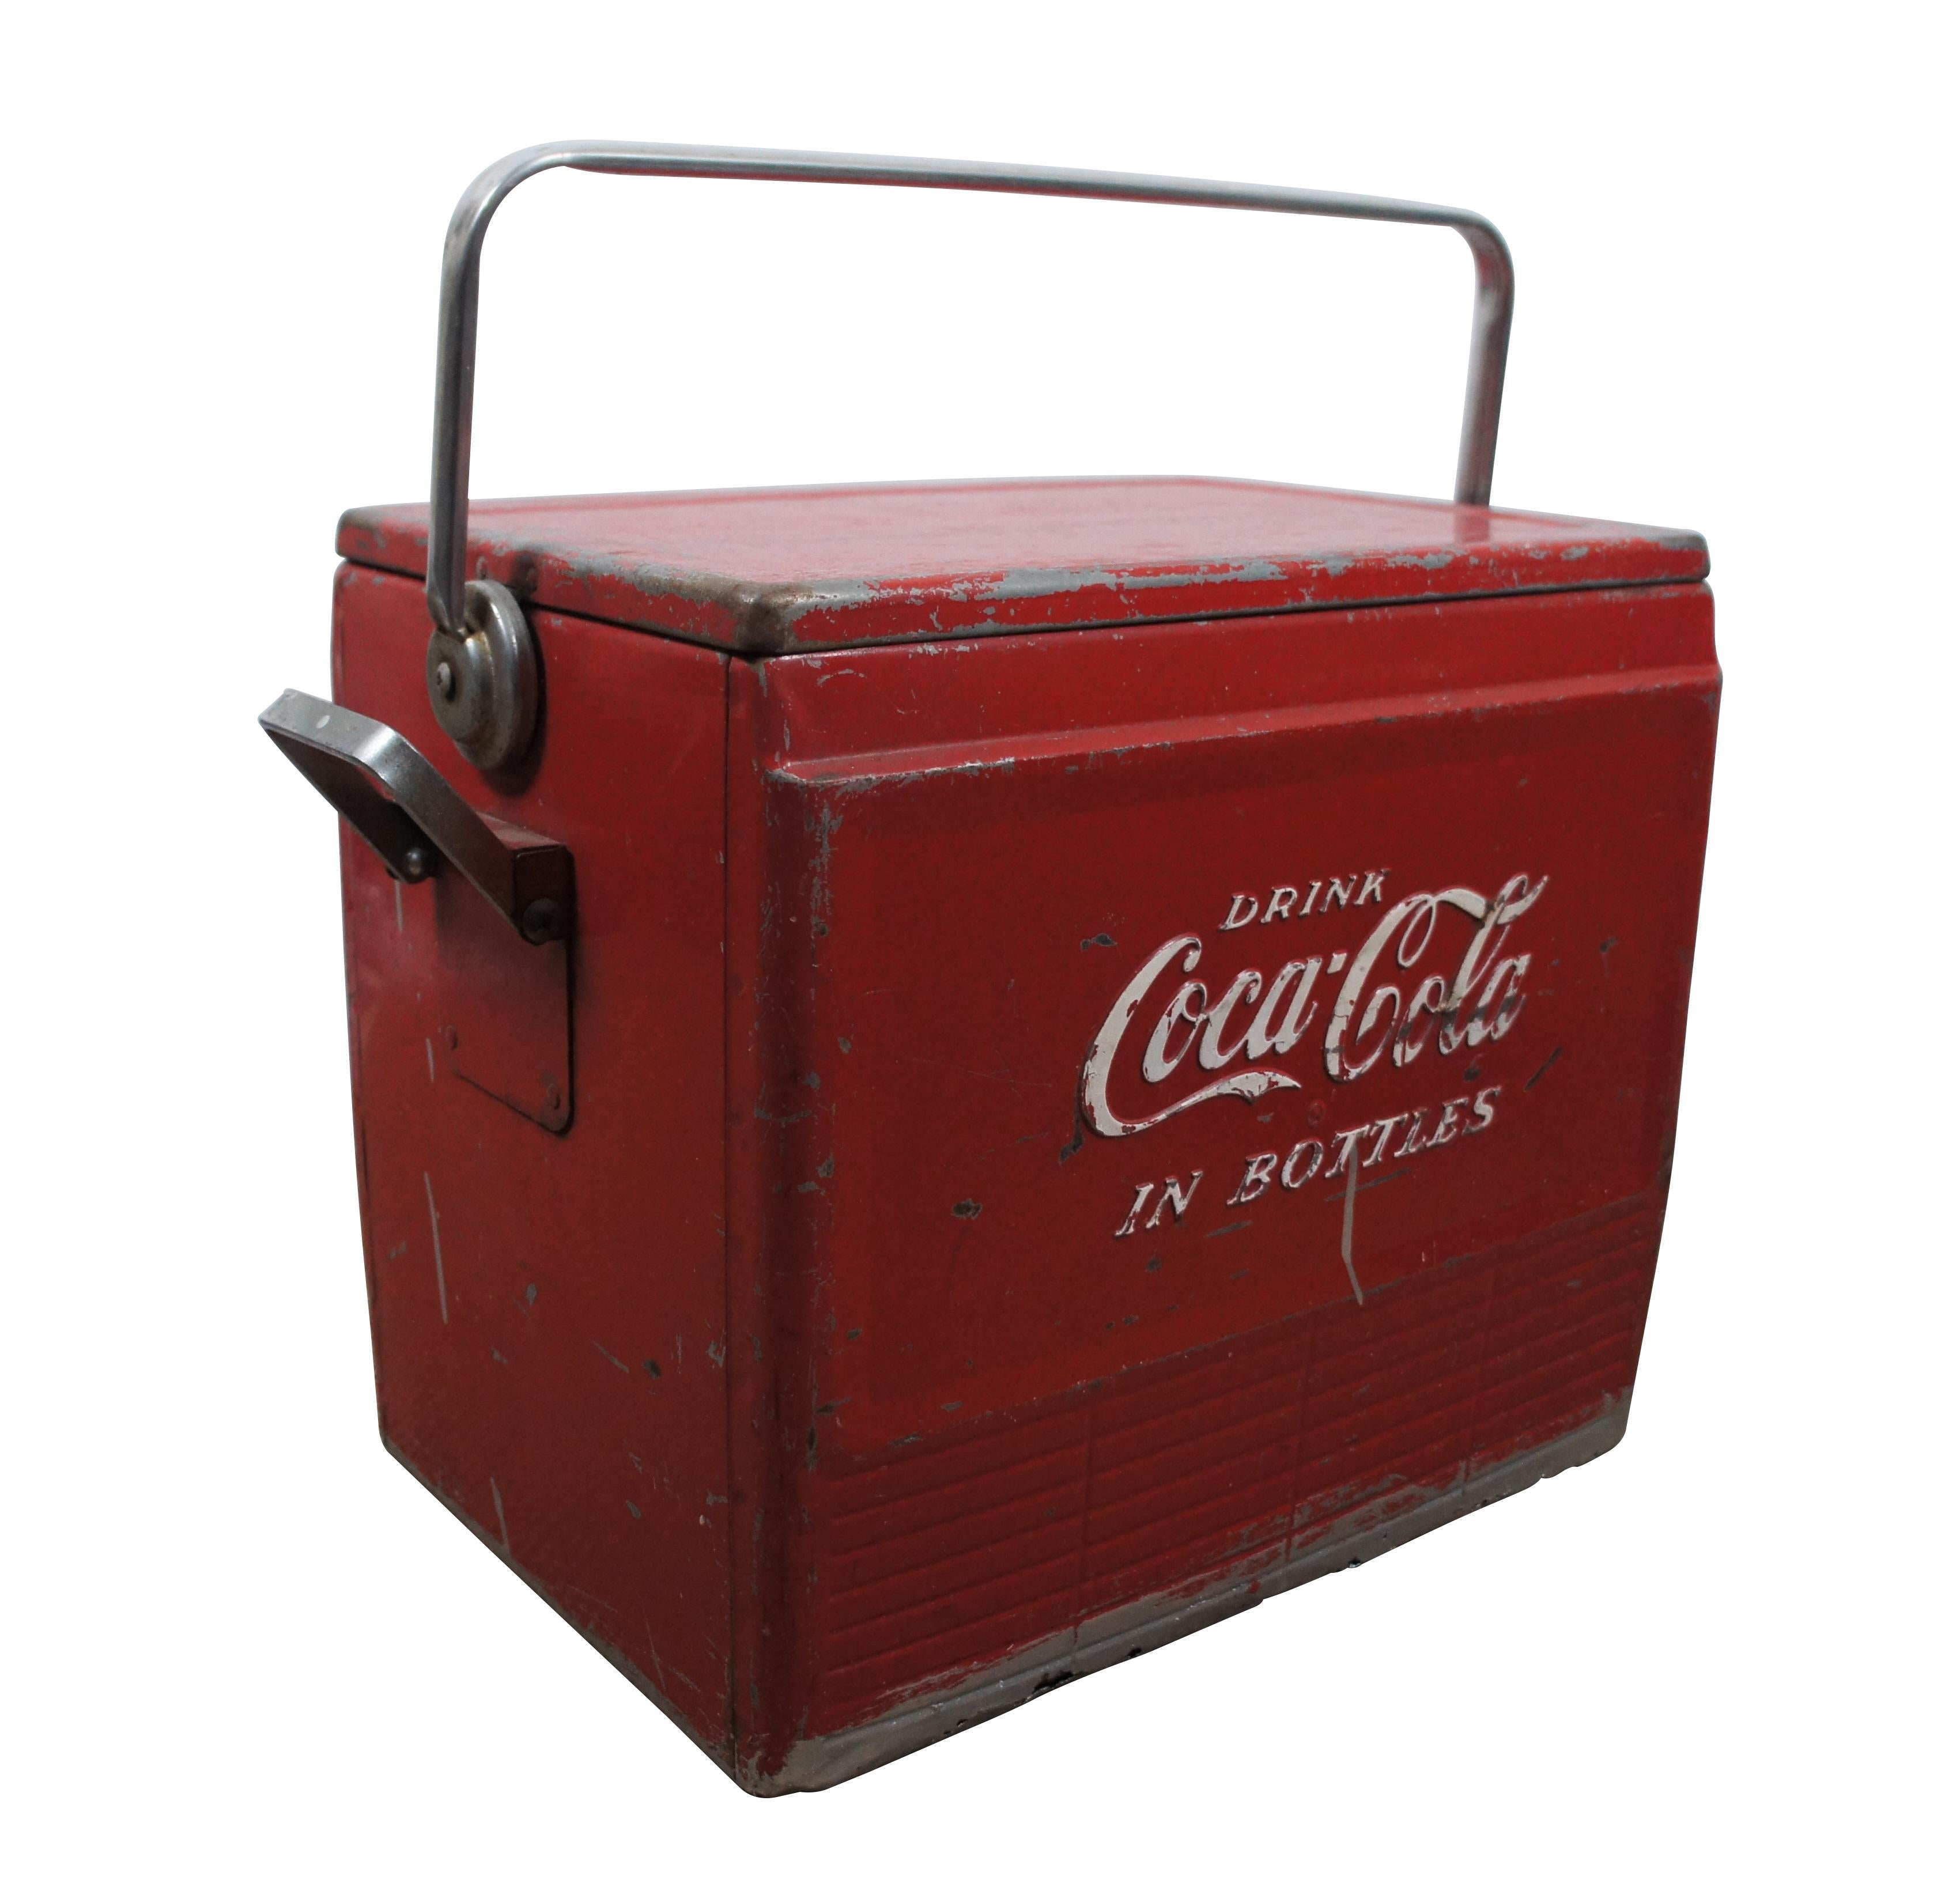 Vintage 1950s Coca Cola red metal beverage cooler featuring tray insert, drain and bottle opener.  Drink Coca Cola in Bottles.

Dimensions:
20